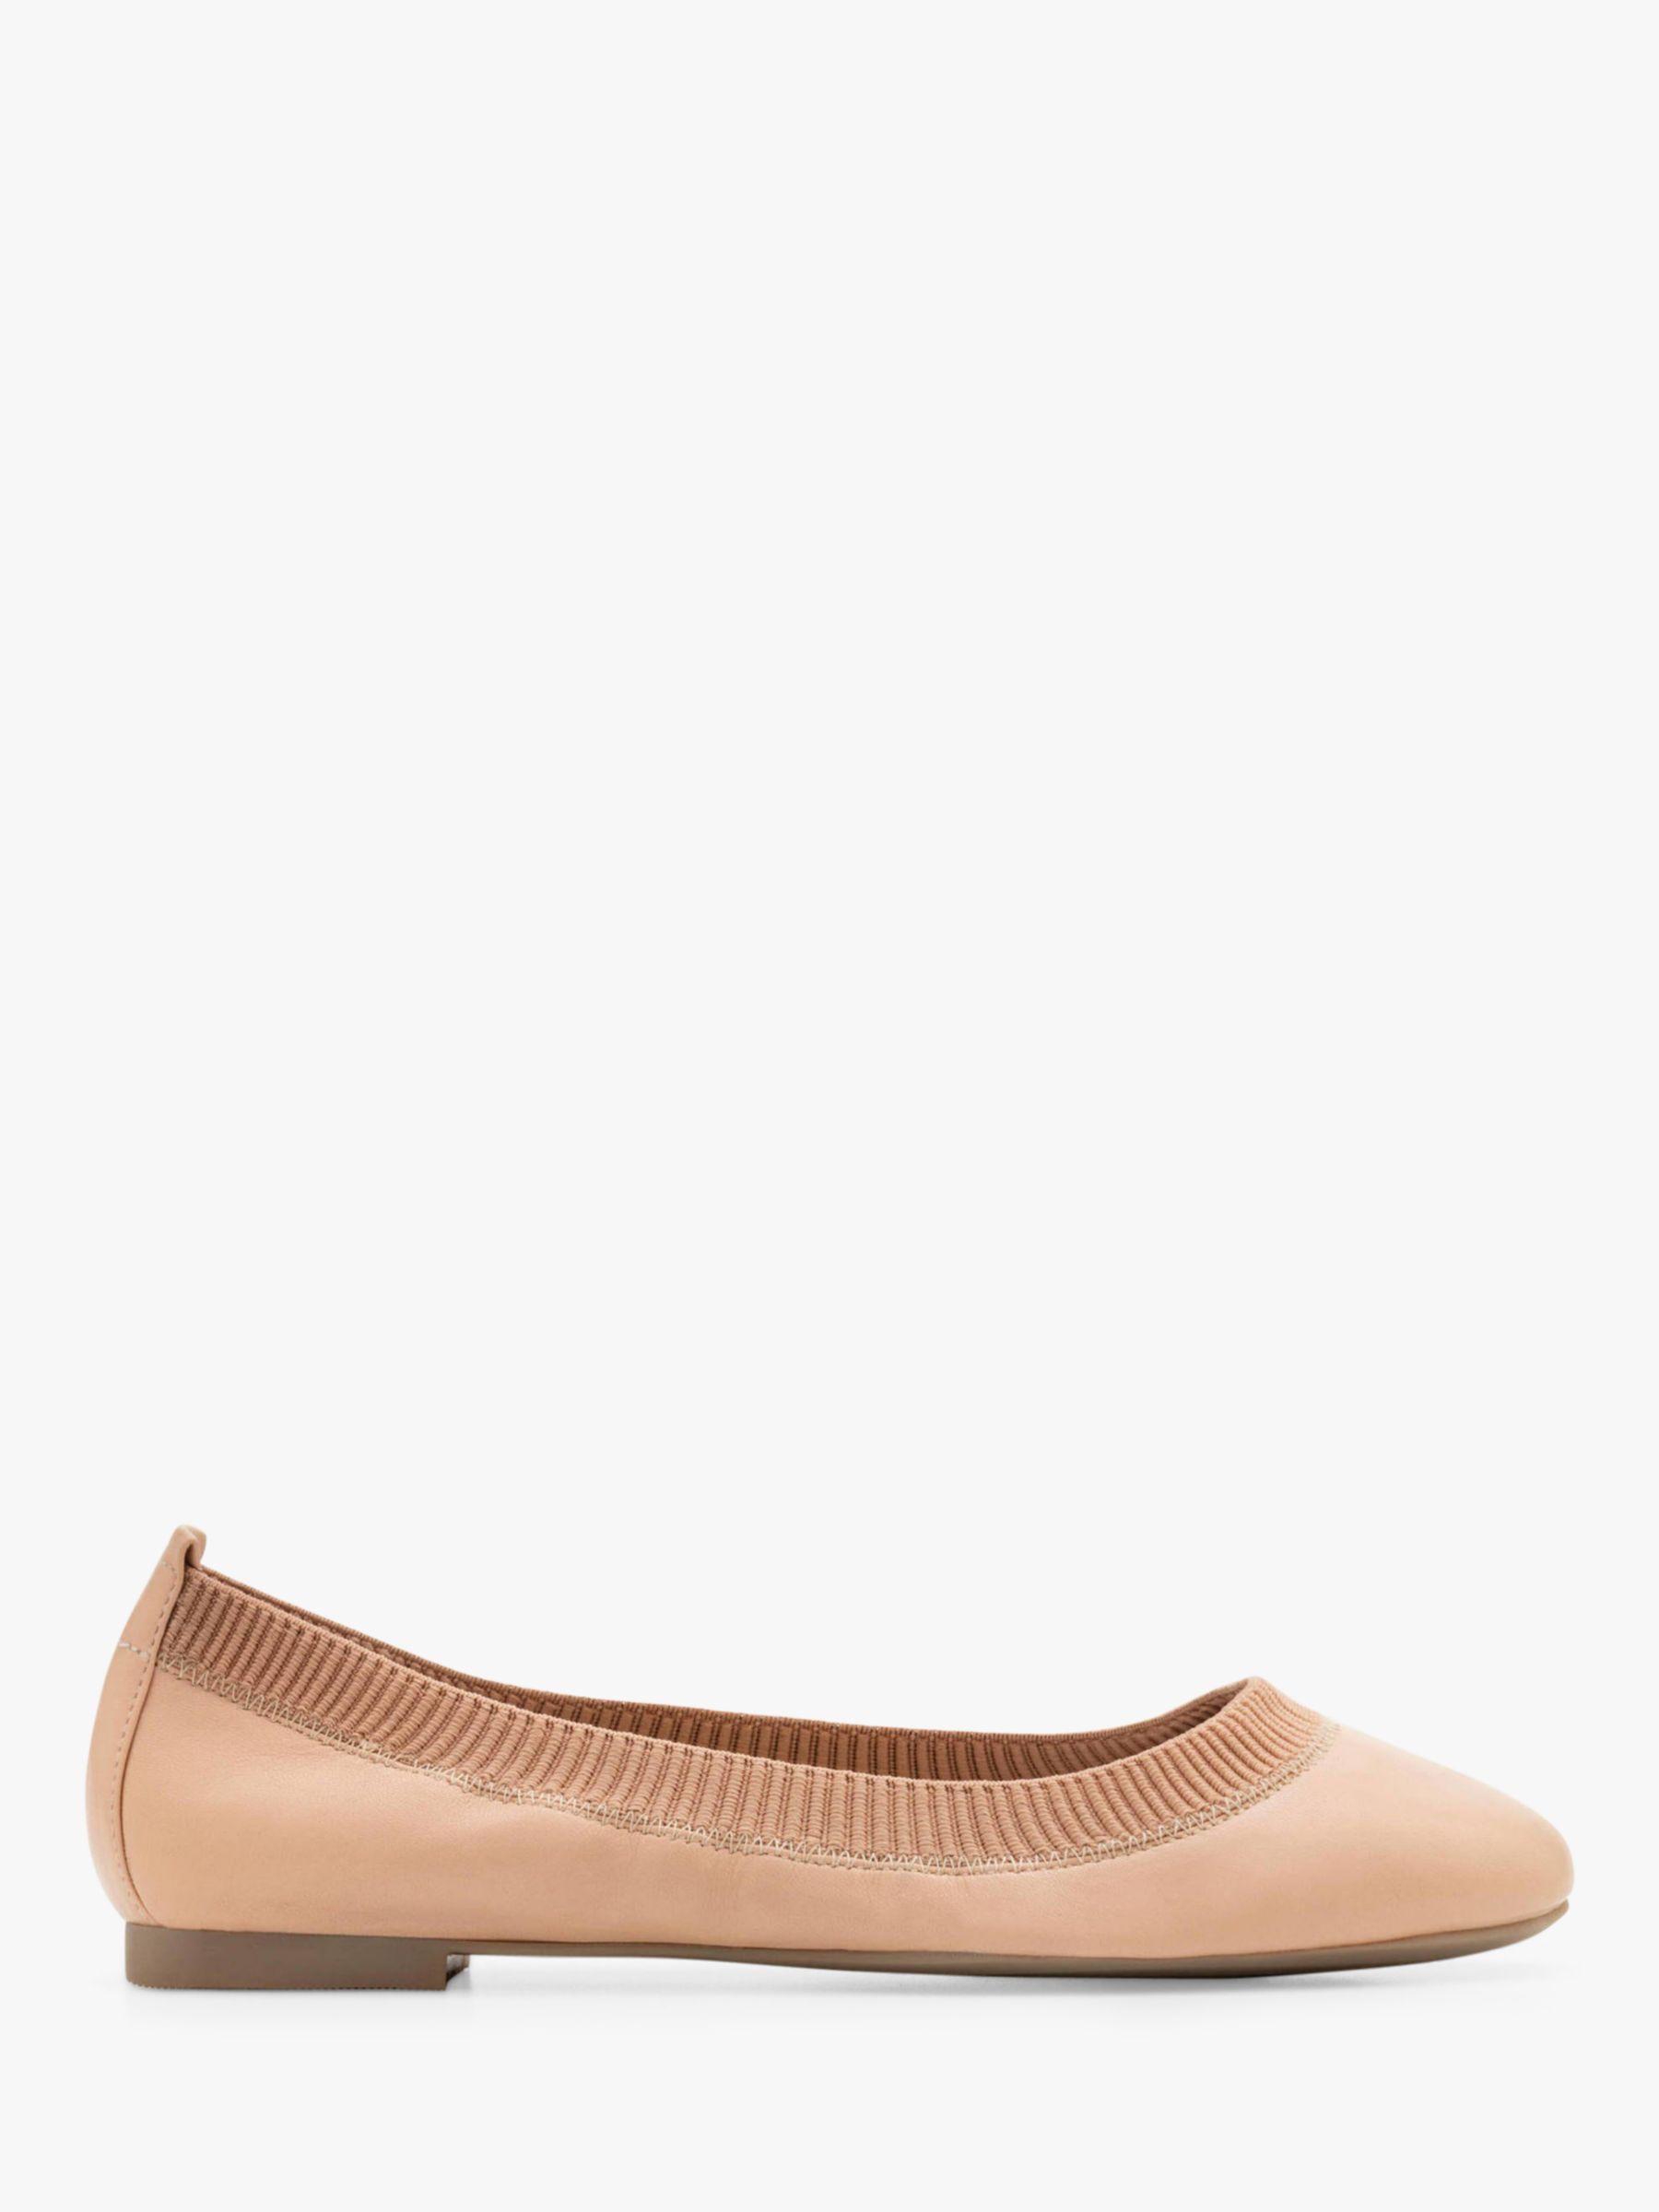 Boden Hettie Leather Ballerina Pumps, Fawn Rose at John Lewis & Partners